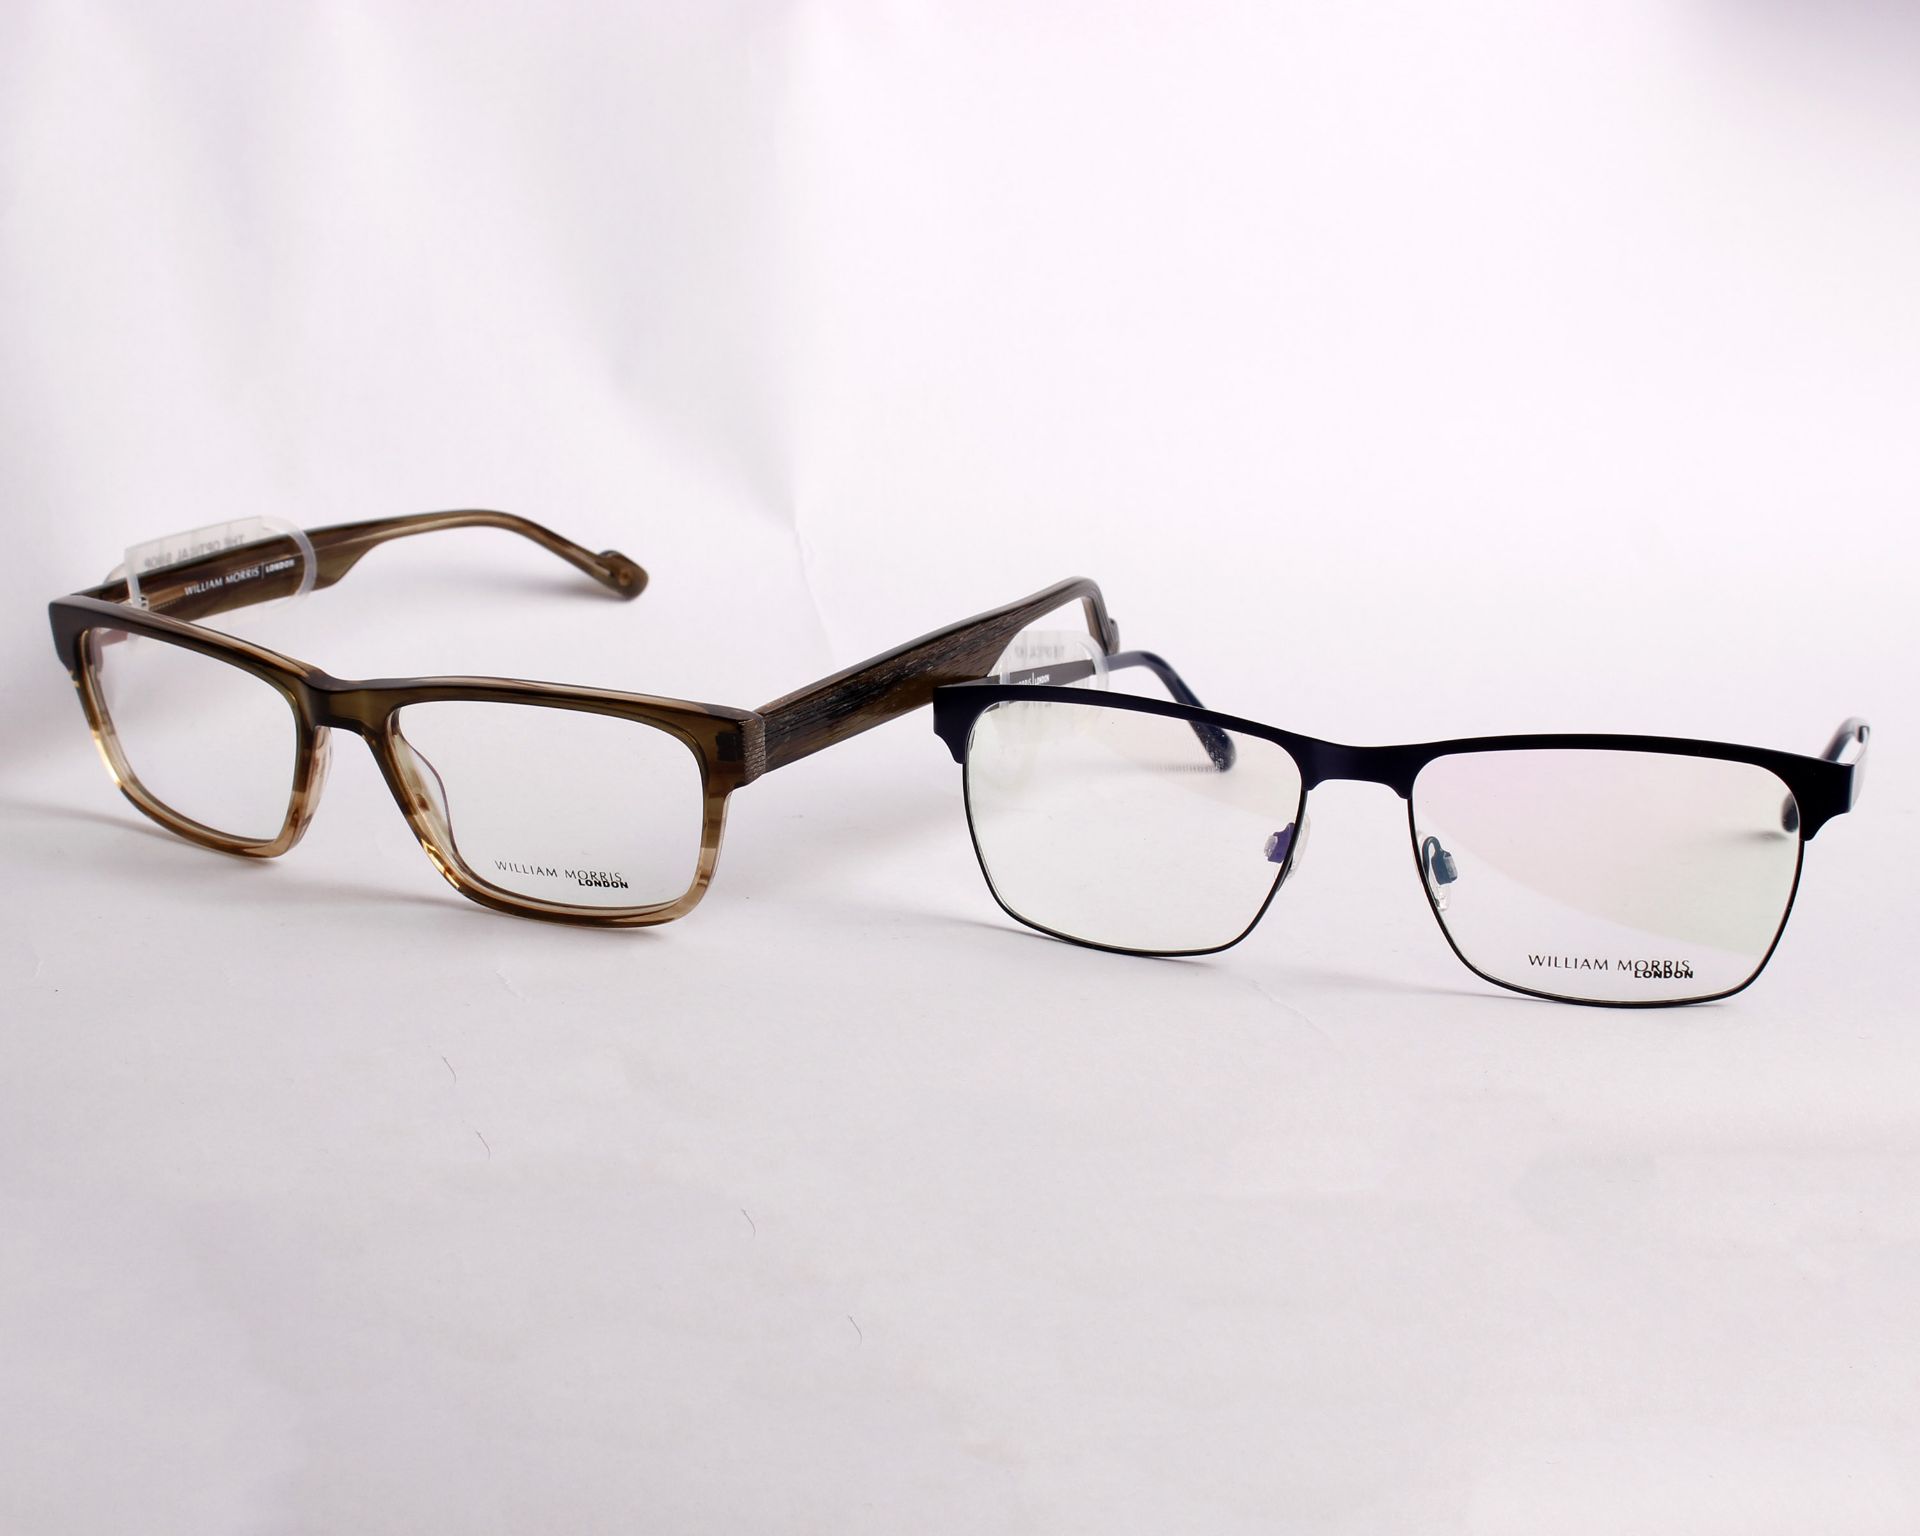 Two pairs of as new William Morris glasses frames with clear glass (RRP £170). - Image 3 of 3